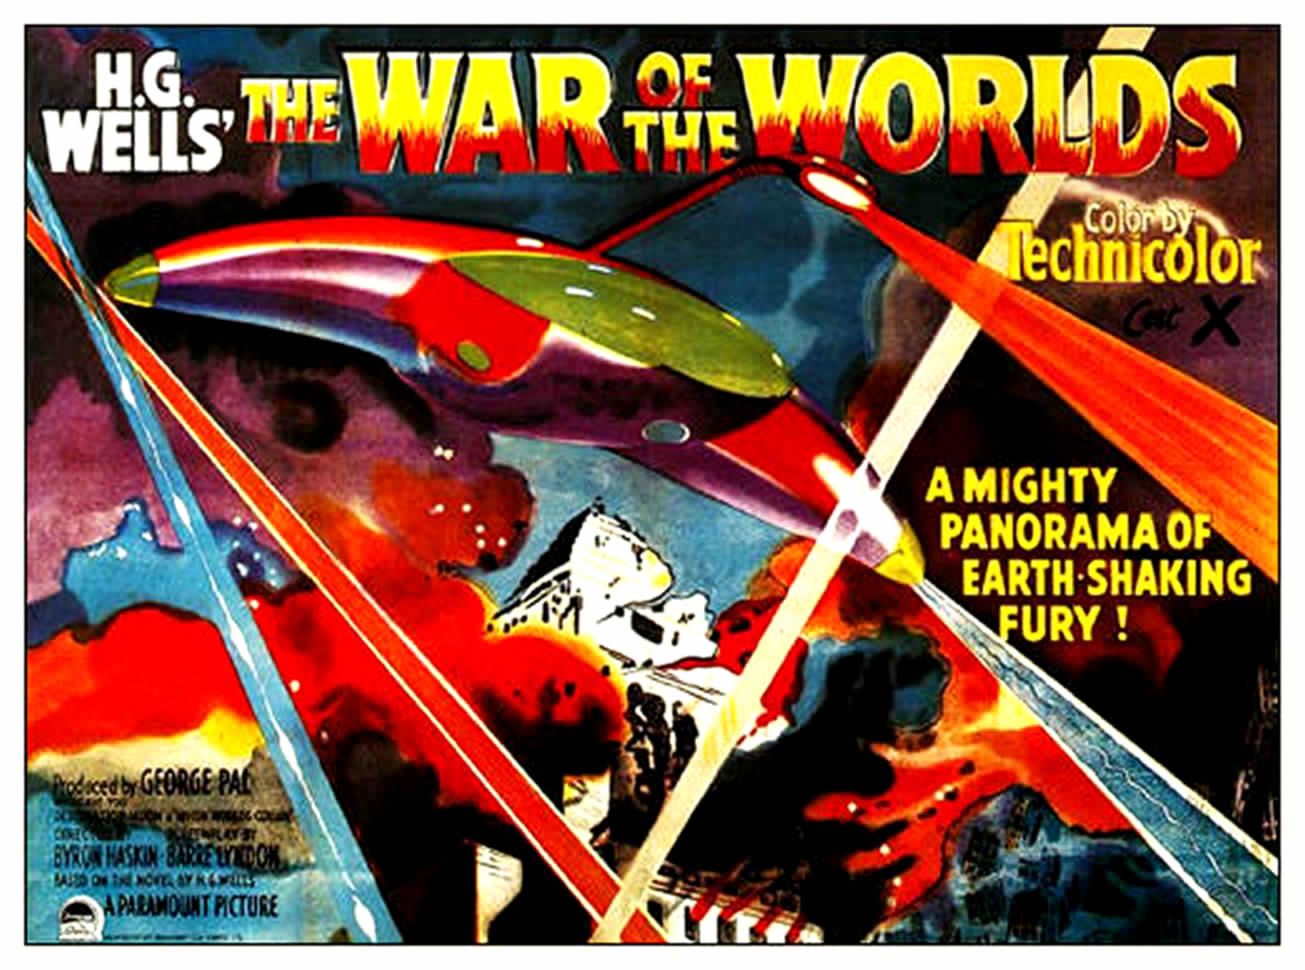 WAR OF THE WORLDS 2 Invasion B Movie Posters